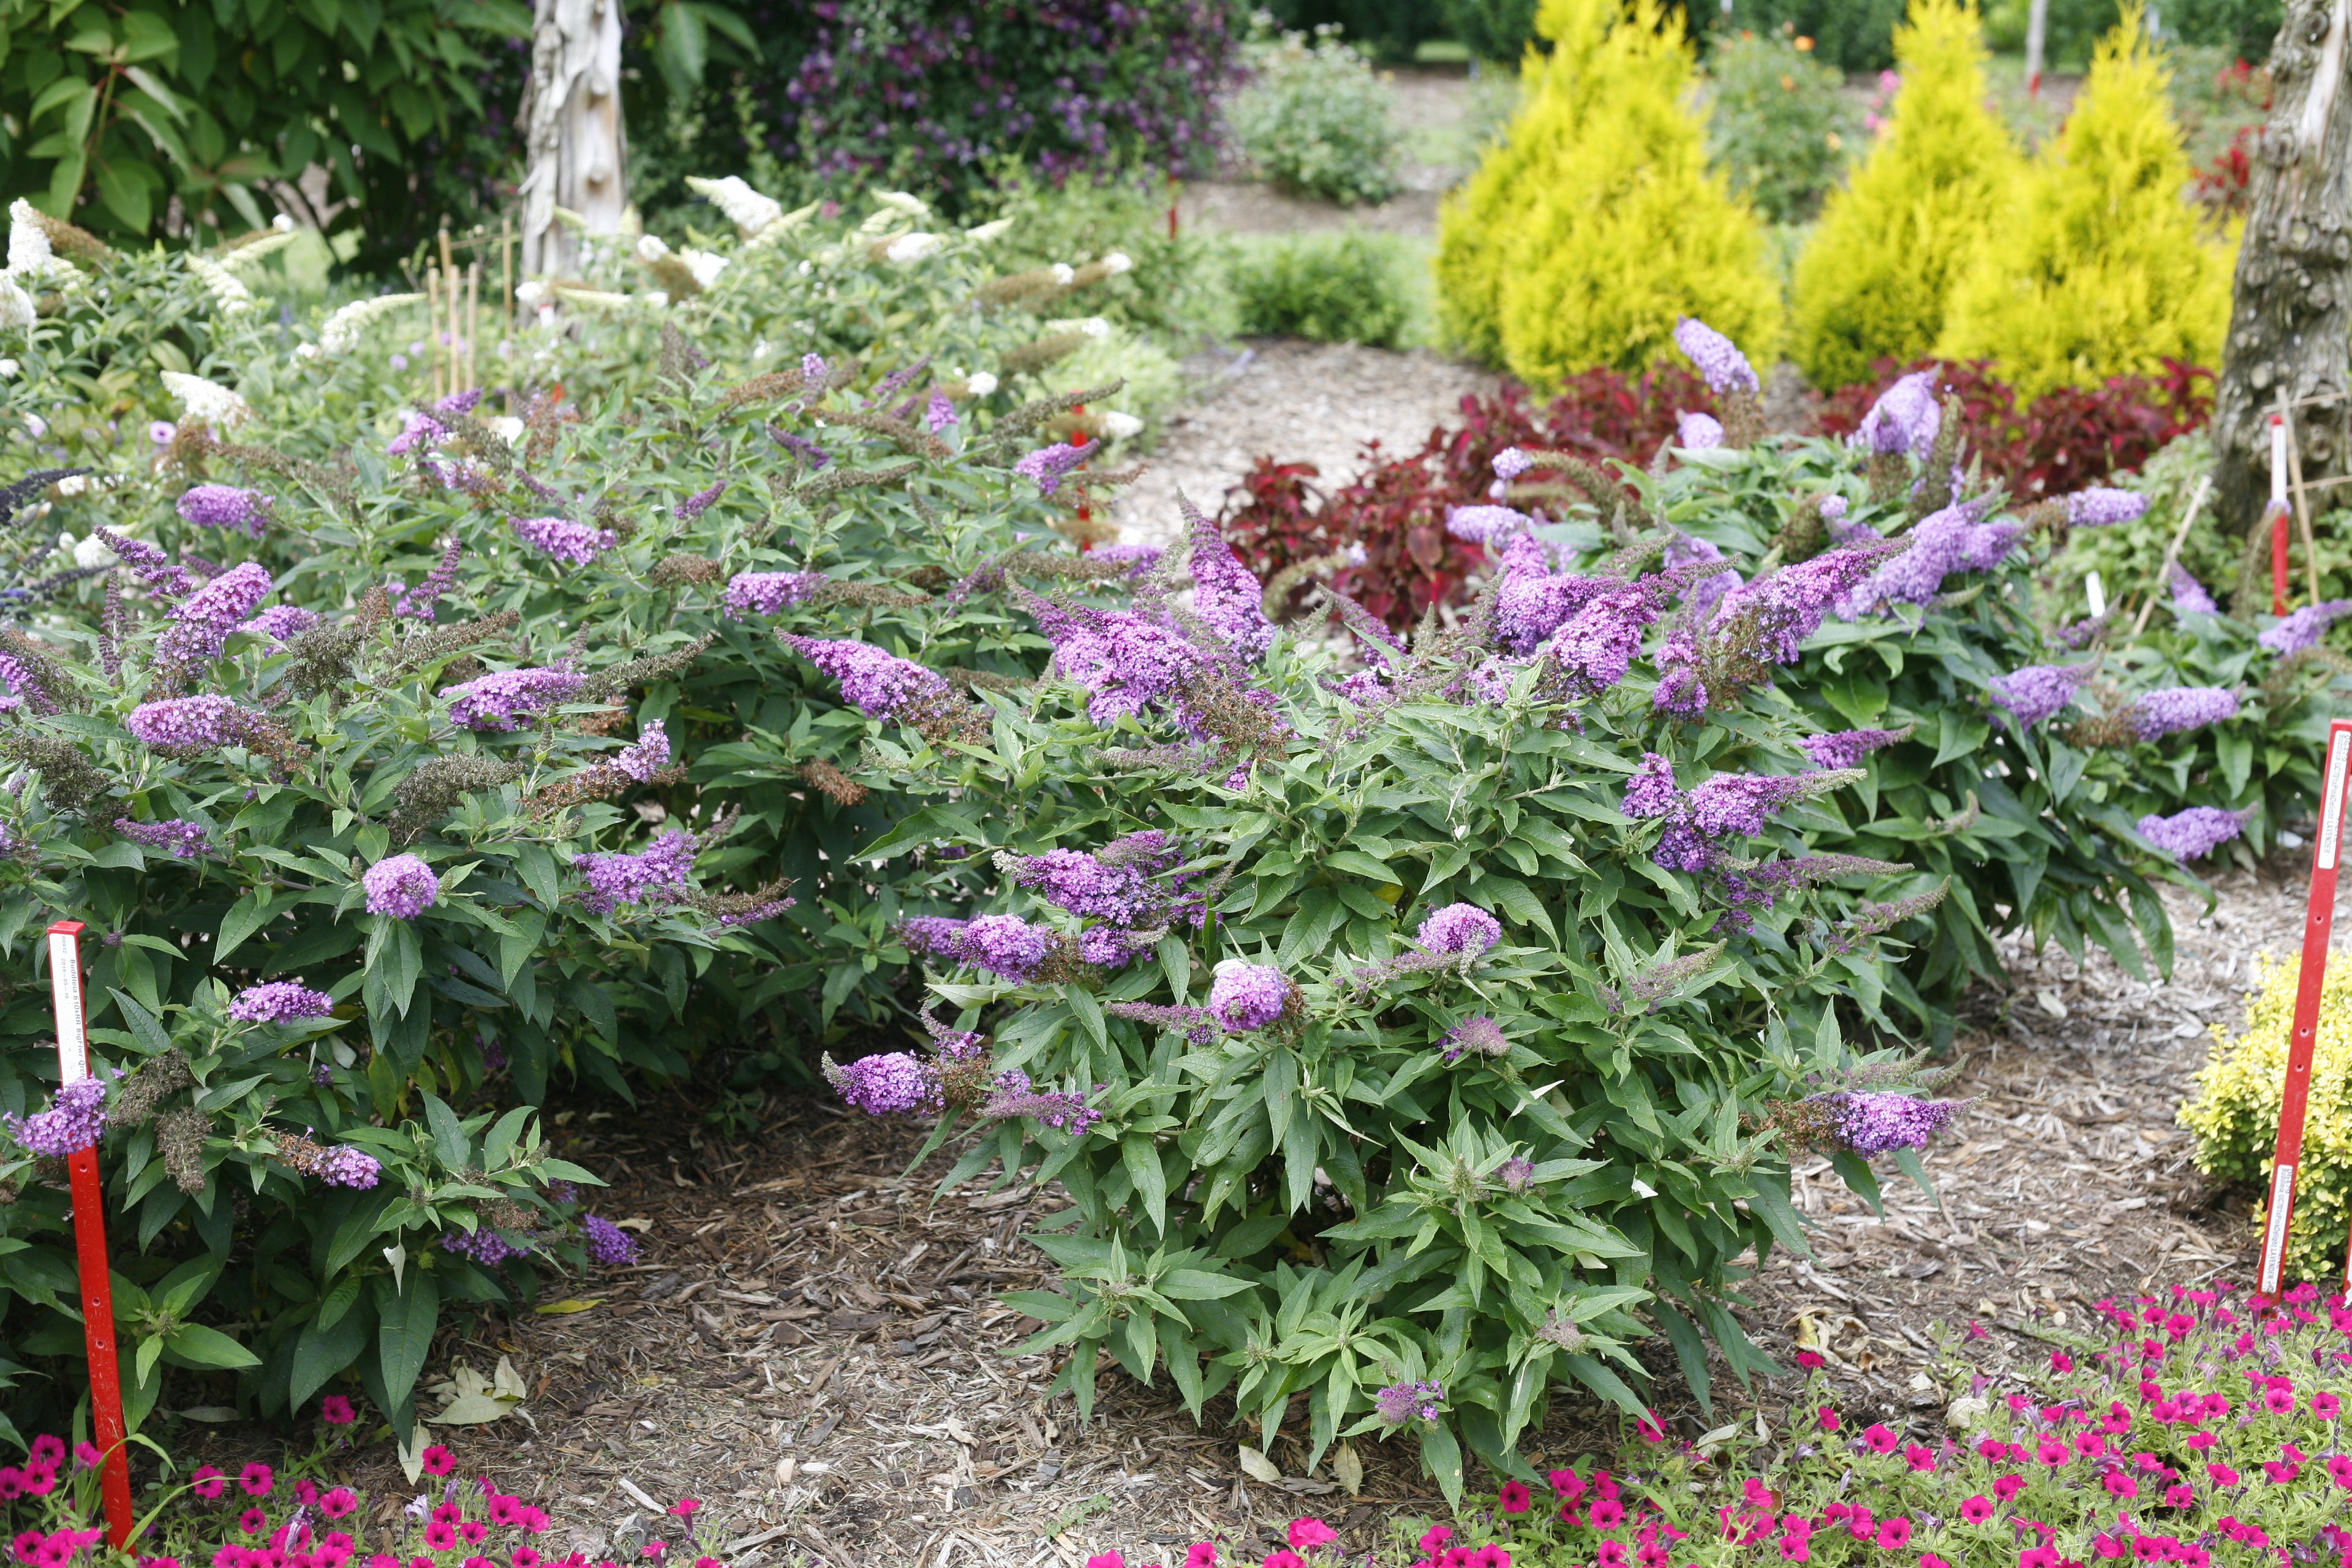 Buddleia Pugster Periwinkle planted in a colorful garden